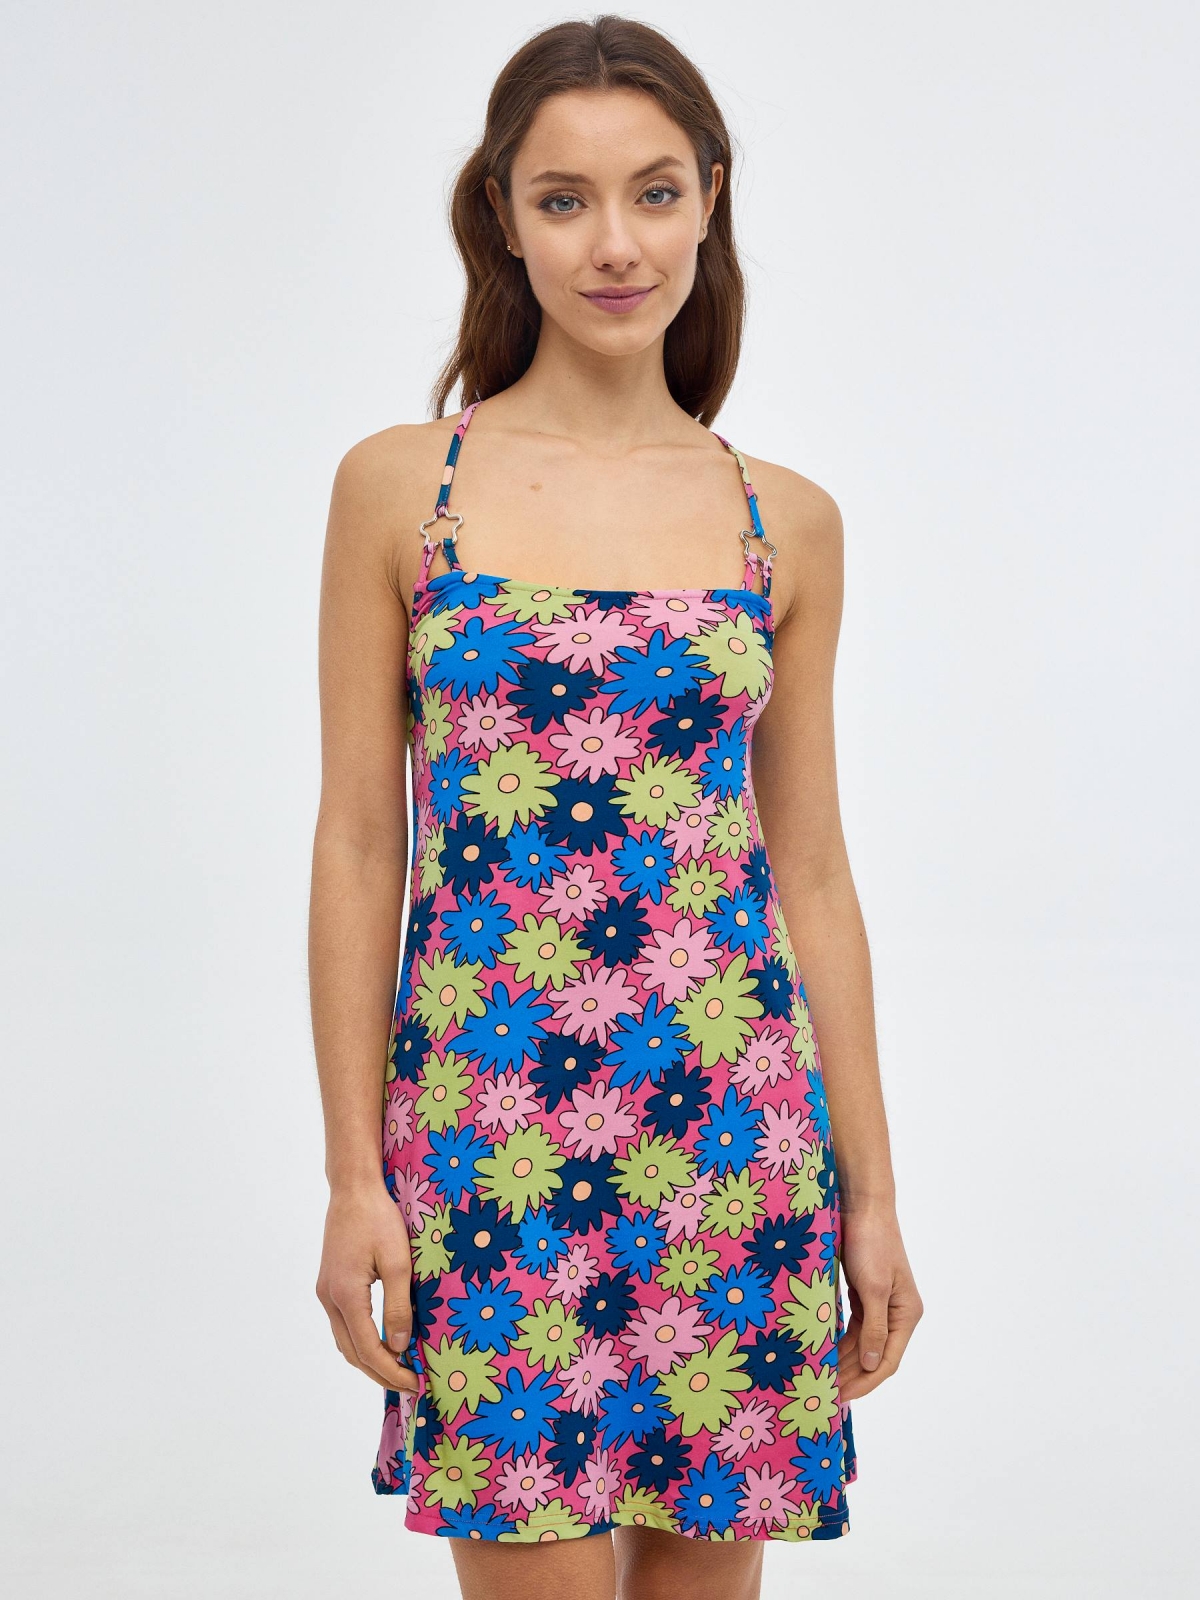 Mini print dress with buckles bubblegum pink middle front view